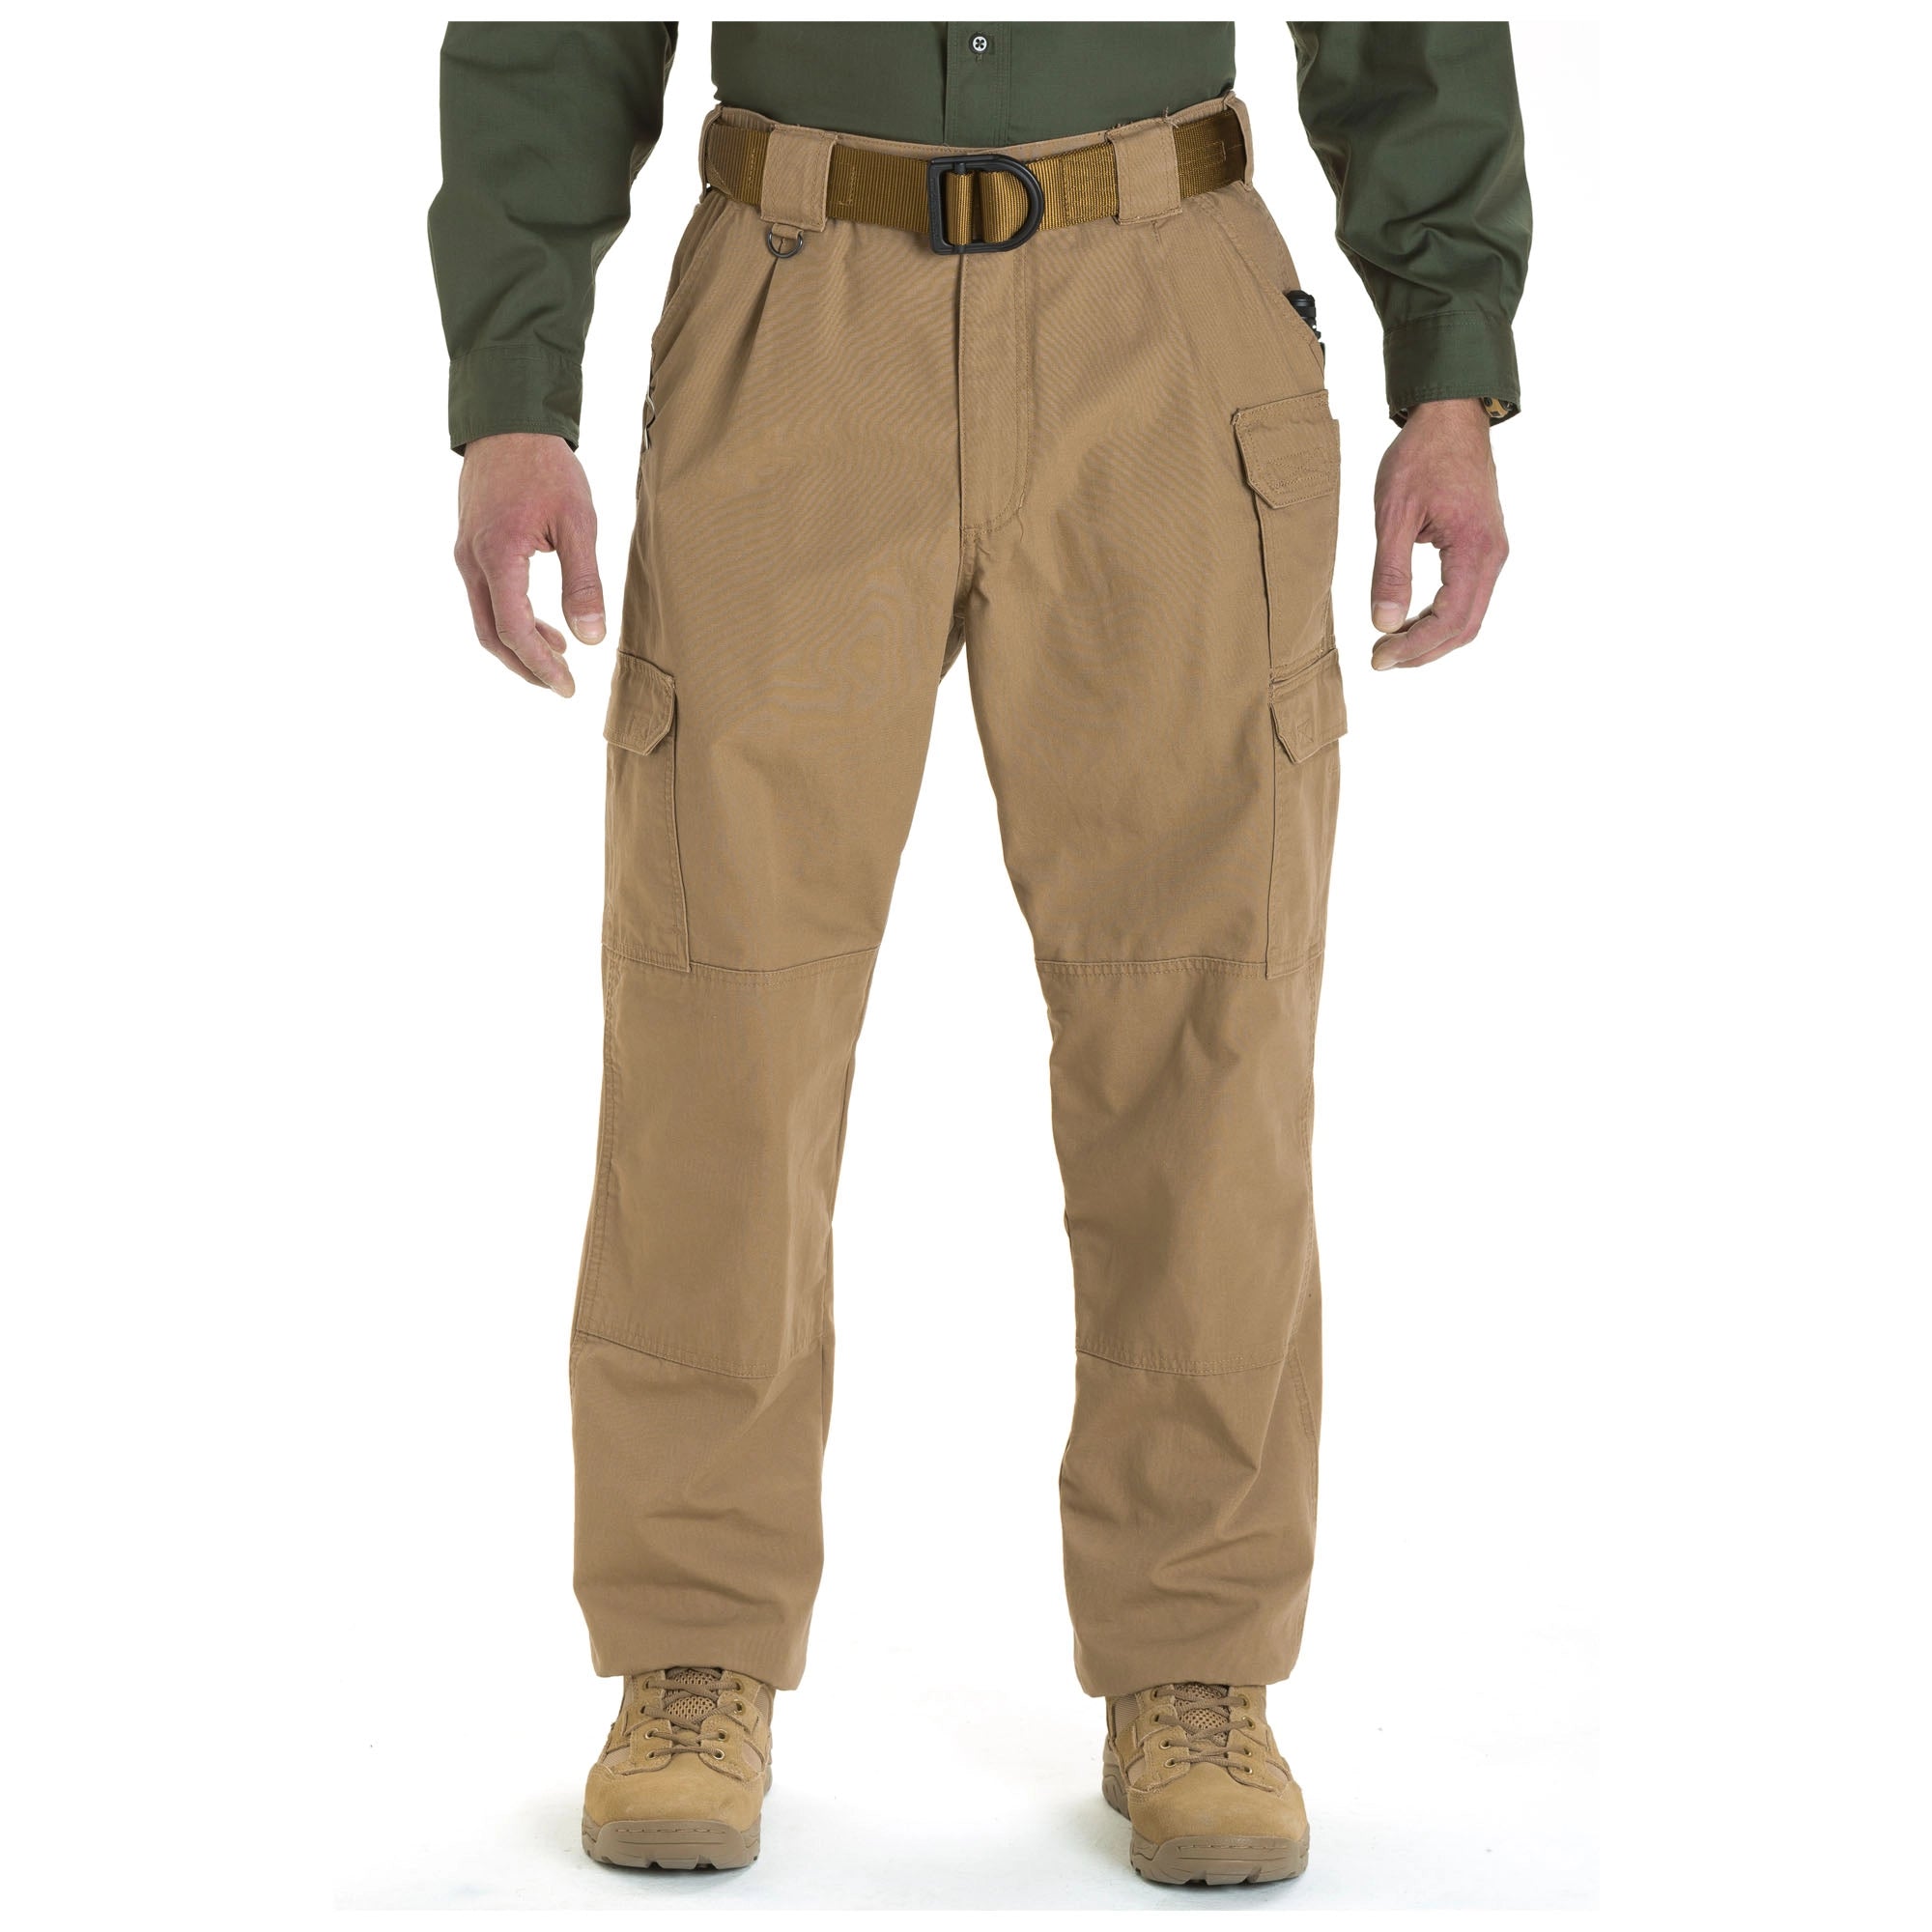 Cotton Cargo Pants In Ludhiana - Prices, Manufacturers & Suppliers